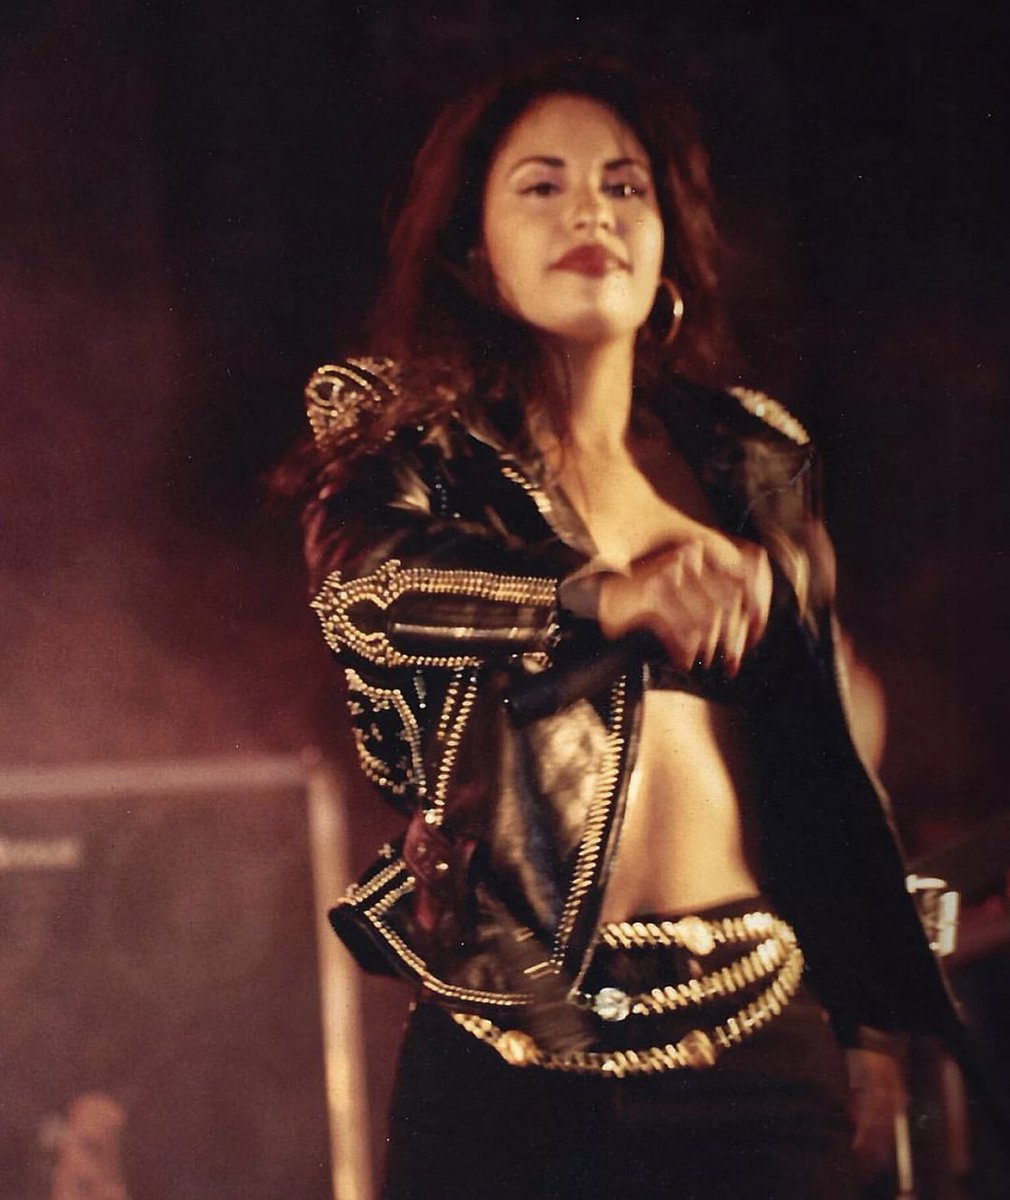 Selena performing at the SeaGate Convention Center in Toledo, Ohio (1994) 📸